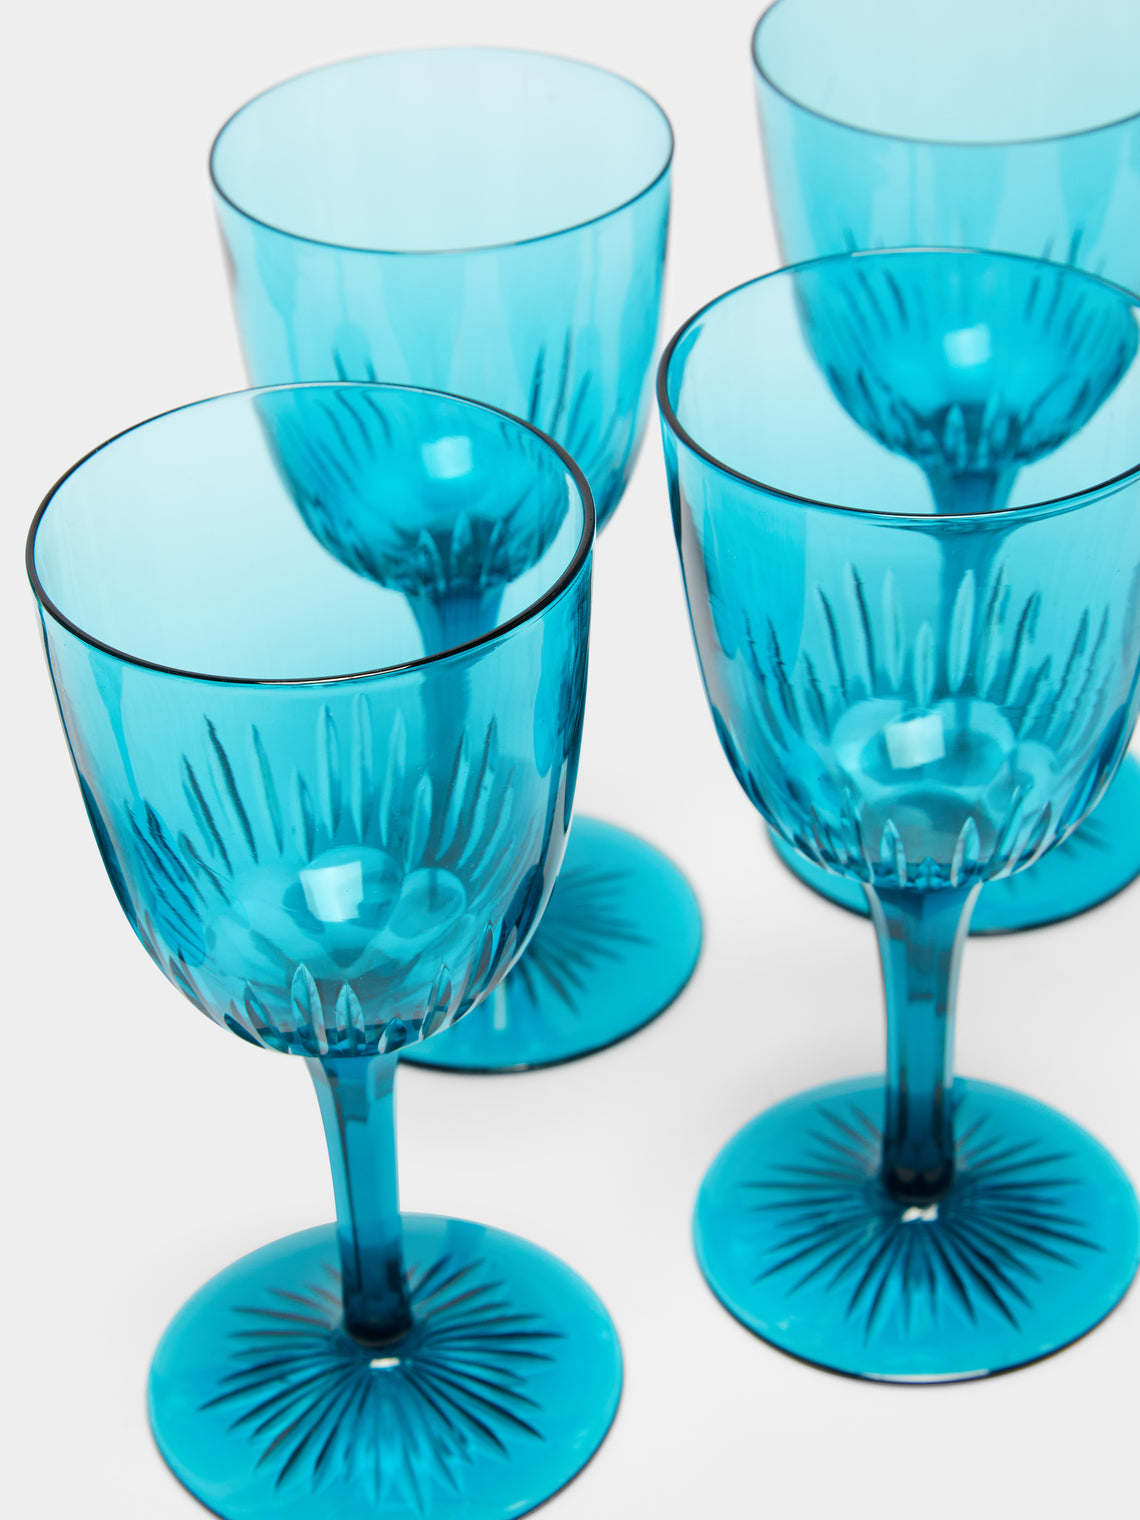 Antique and Vintage - 1880s Victorian Peacock Cut Crystal Wine Glasses (Set of 8) -  - ABASK